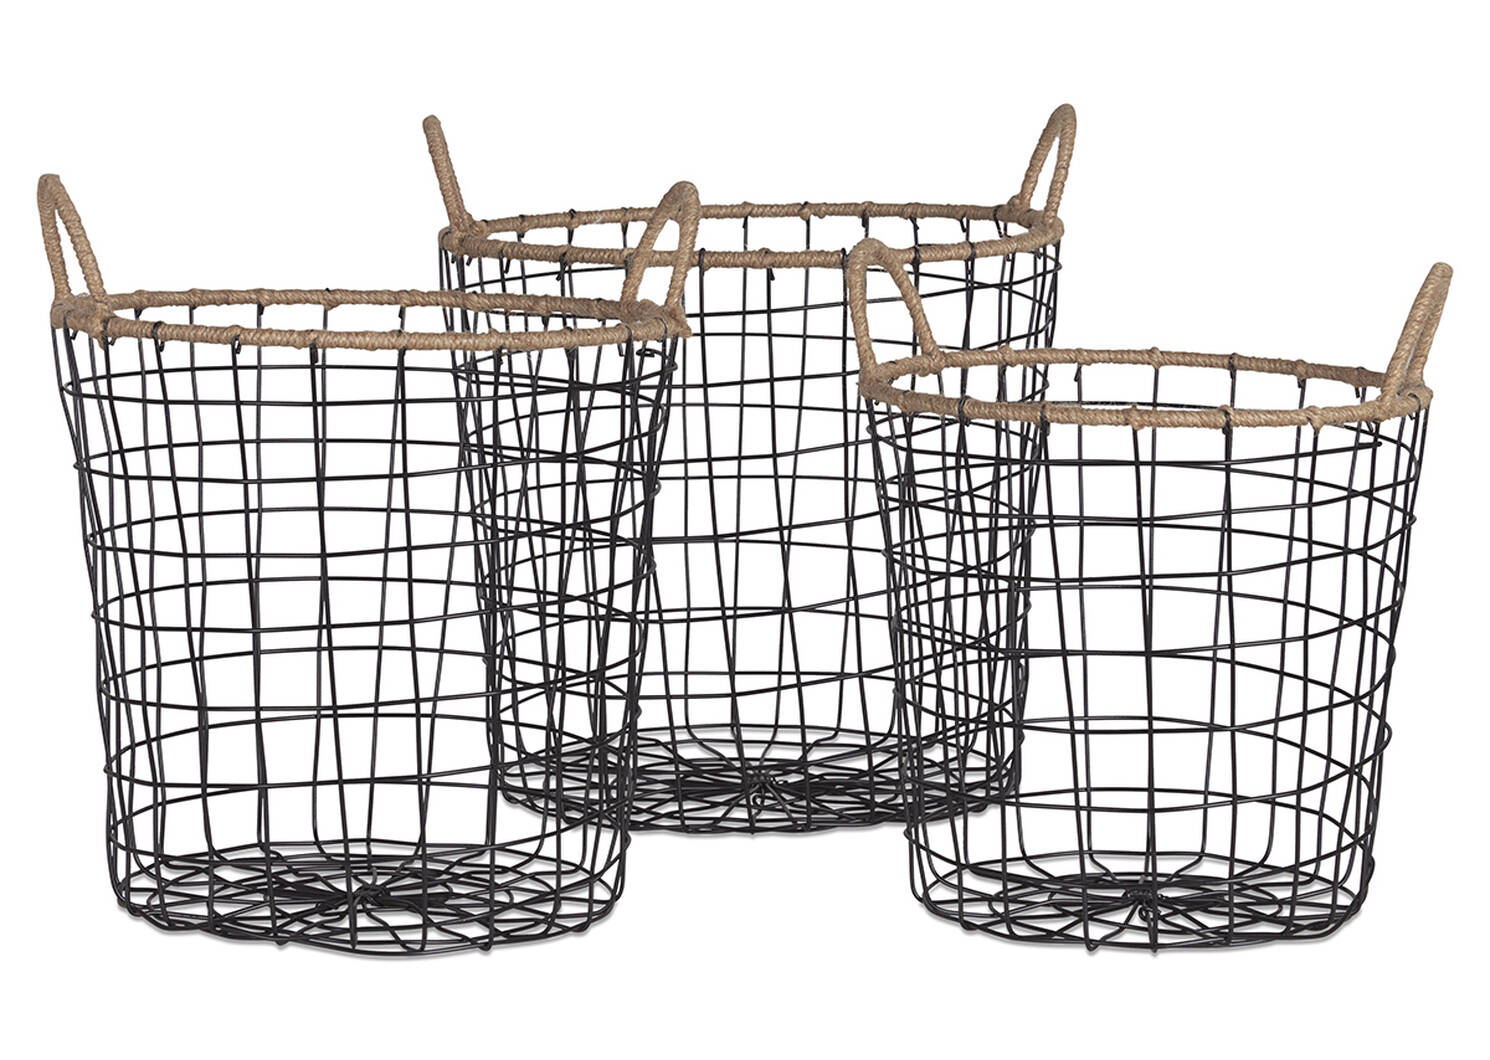 Jackman Wire Basket Small Natural/Black